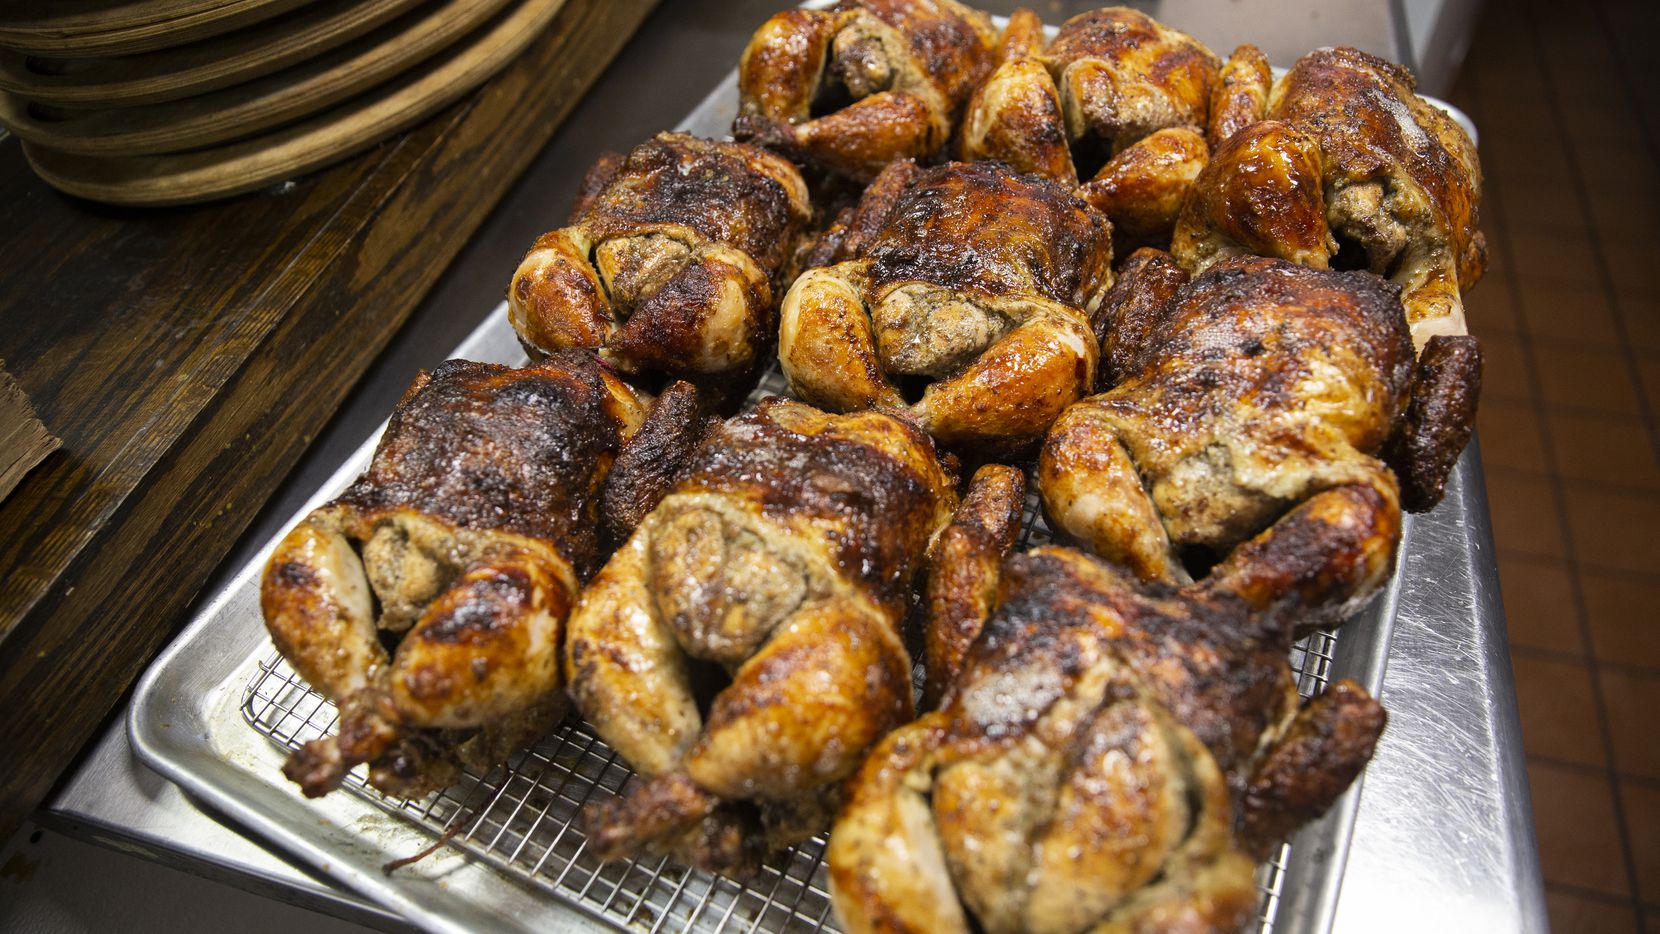 The pollo a la brasa (Peruvian roasted chicken) comes out of the oven at the Brasa Bar and...